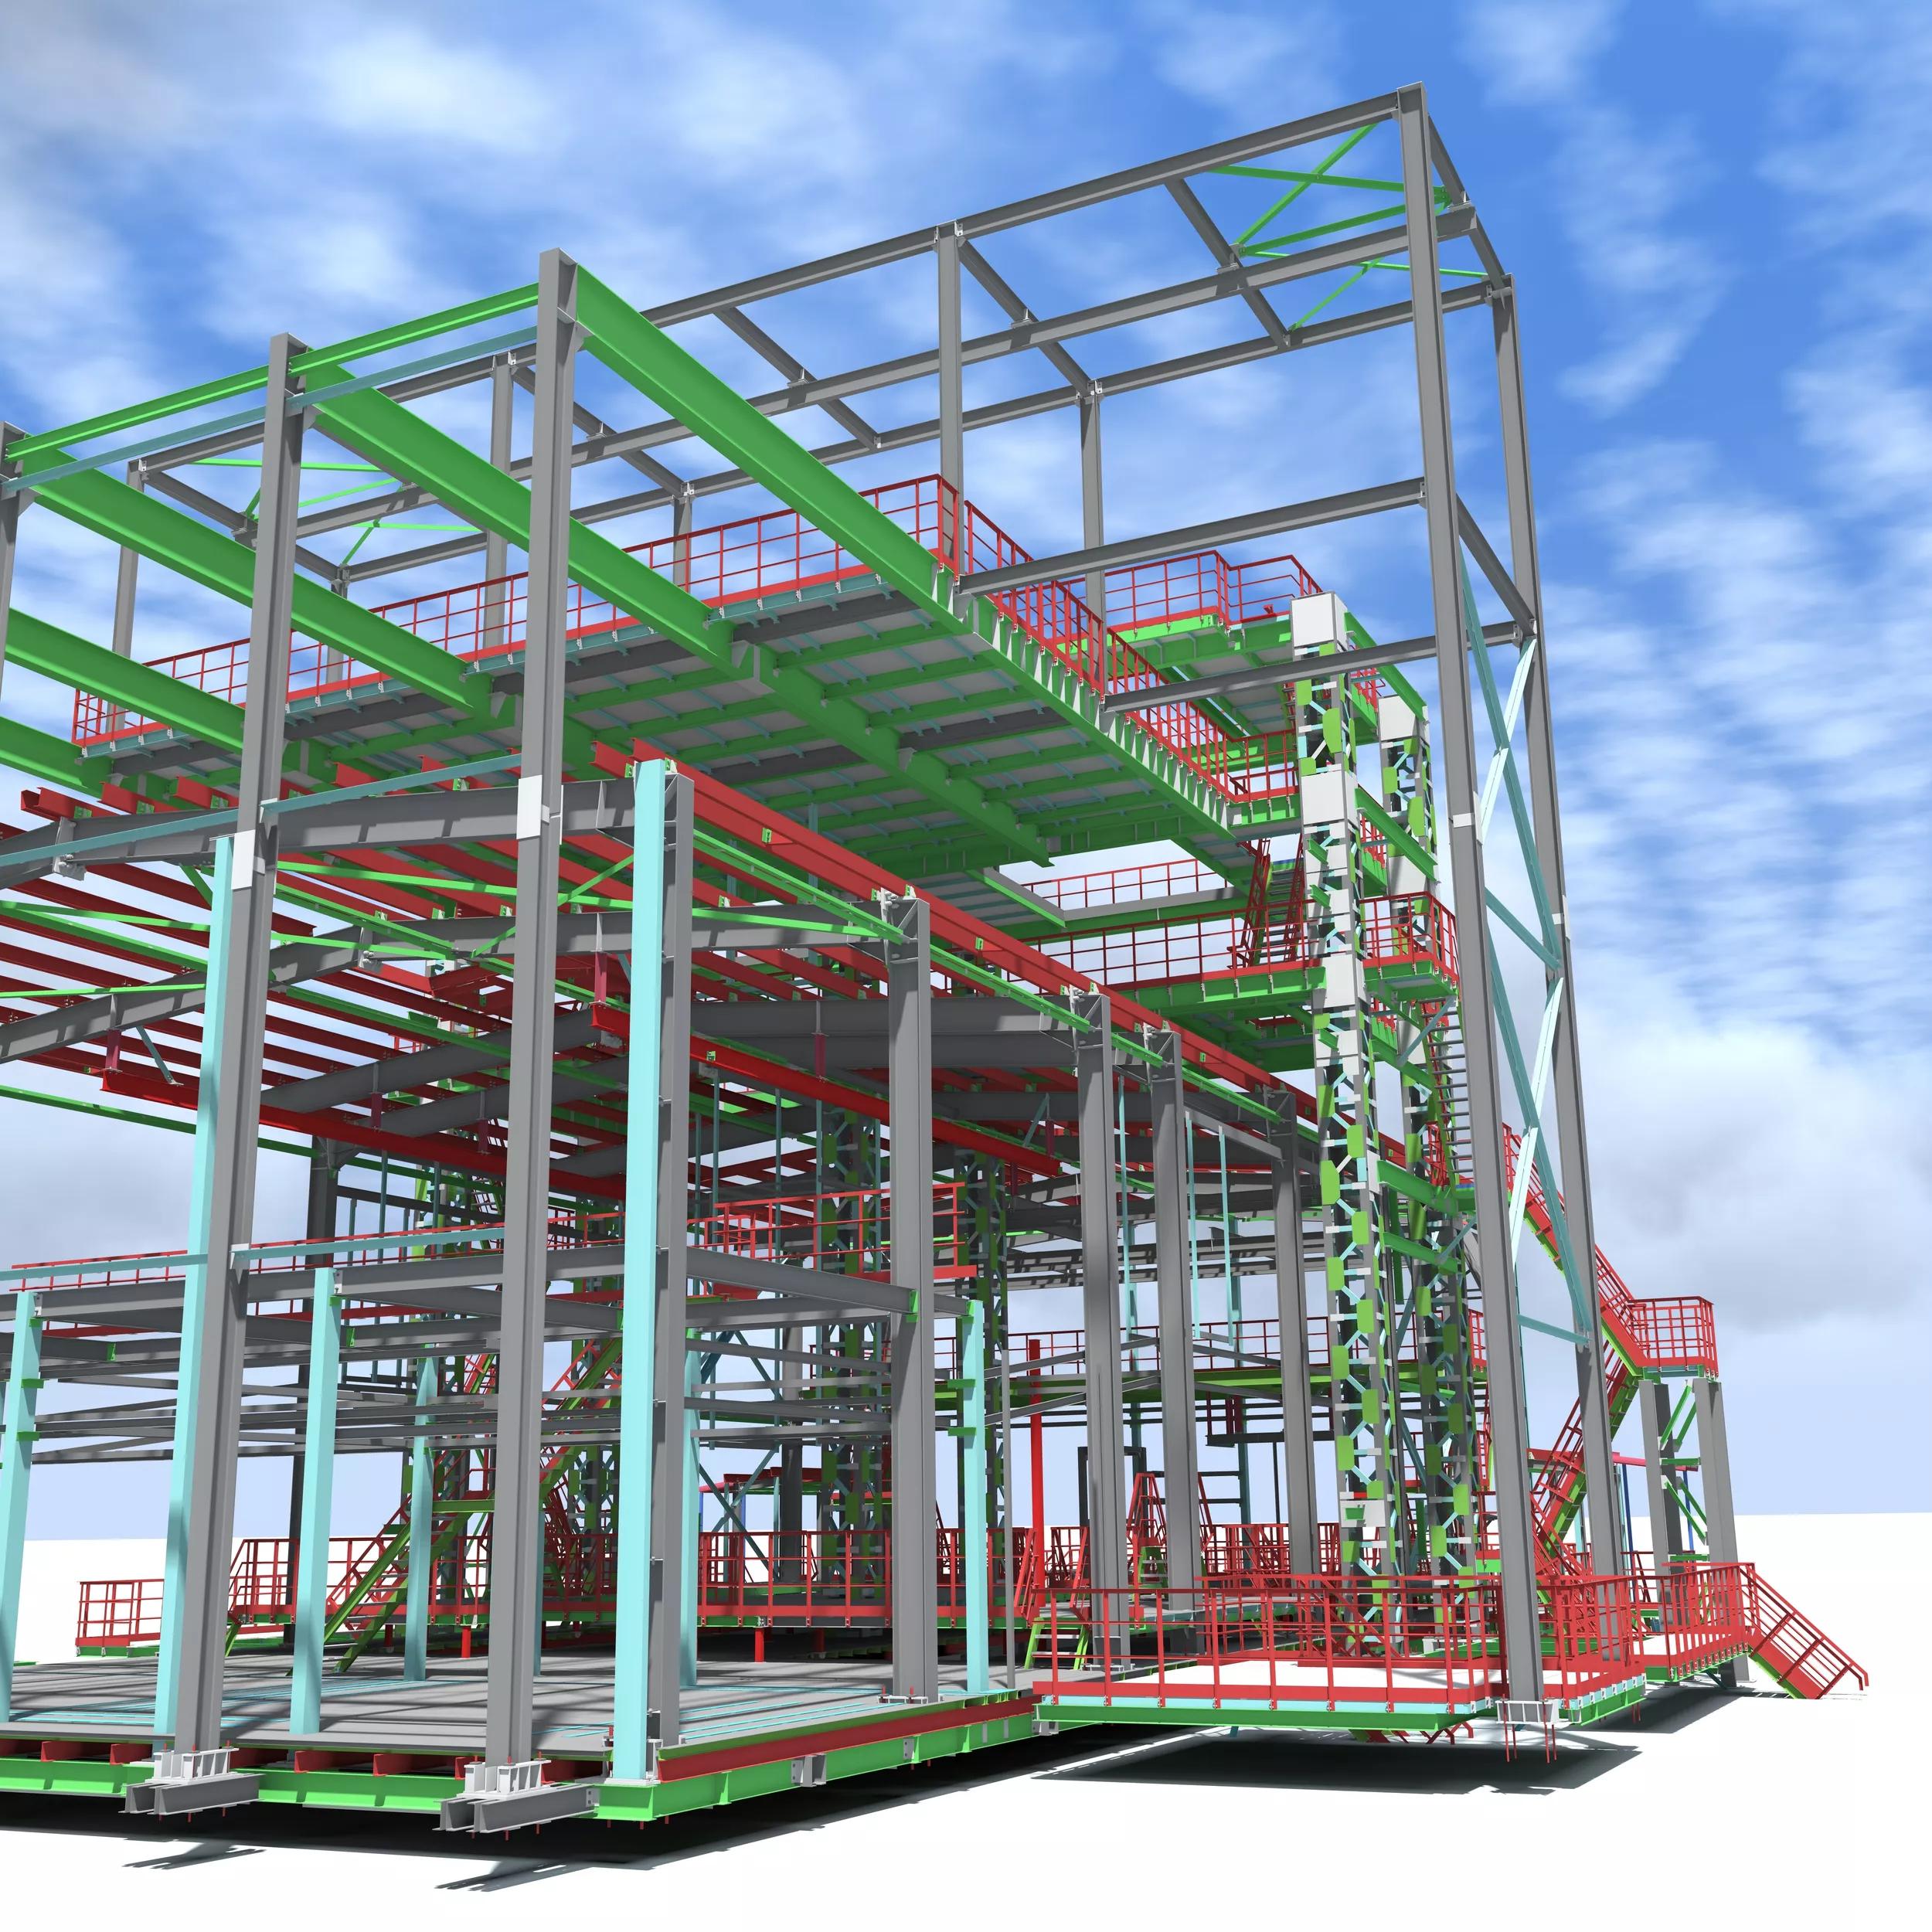 3D CAD image of a factory for use in a metaverse environment or digital twin